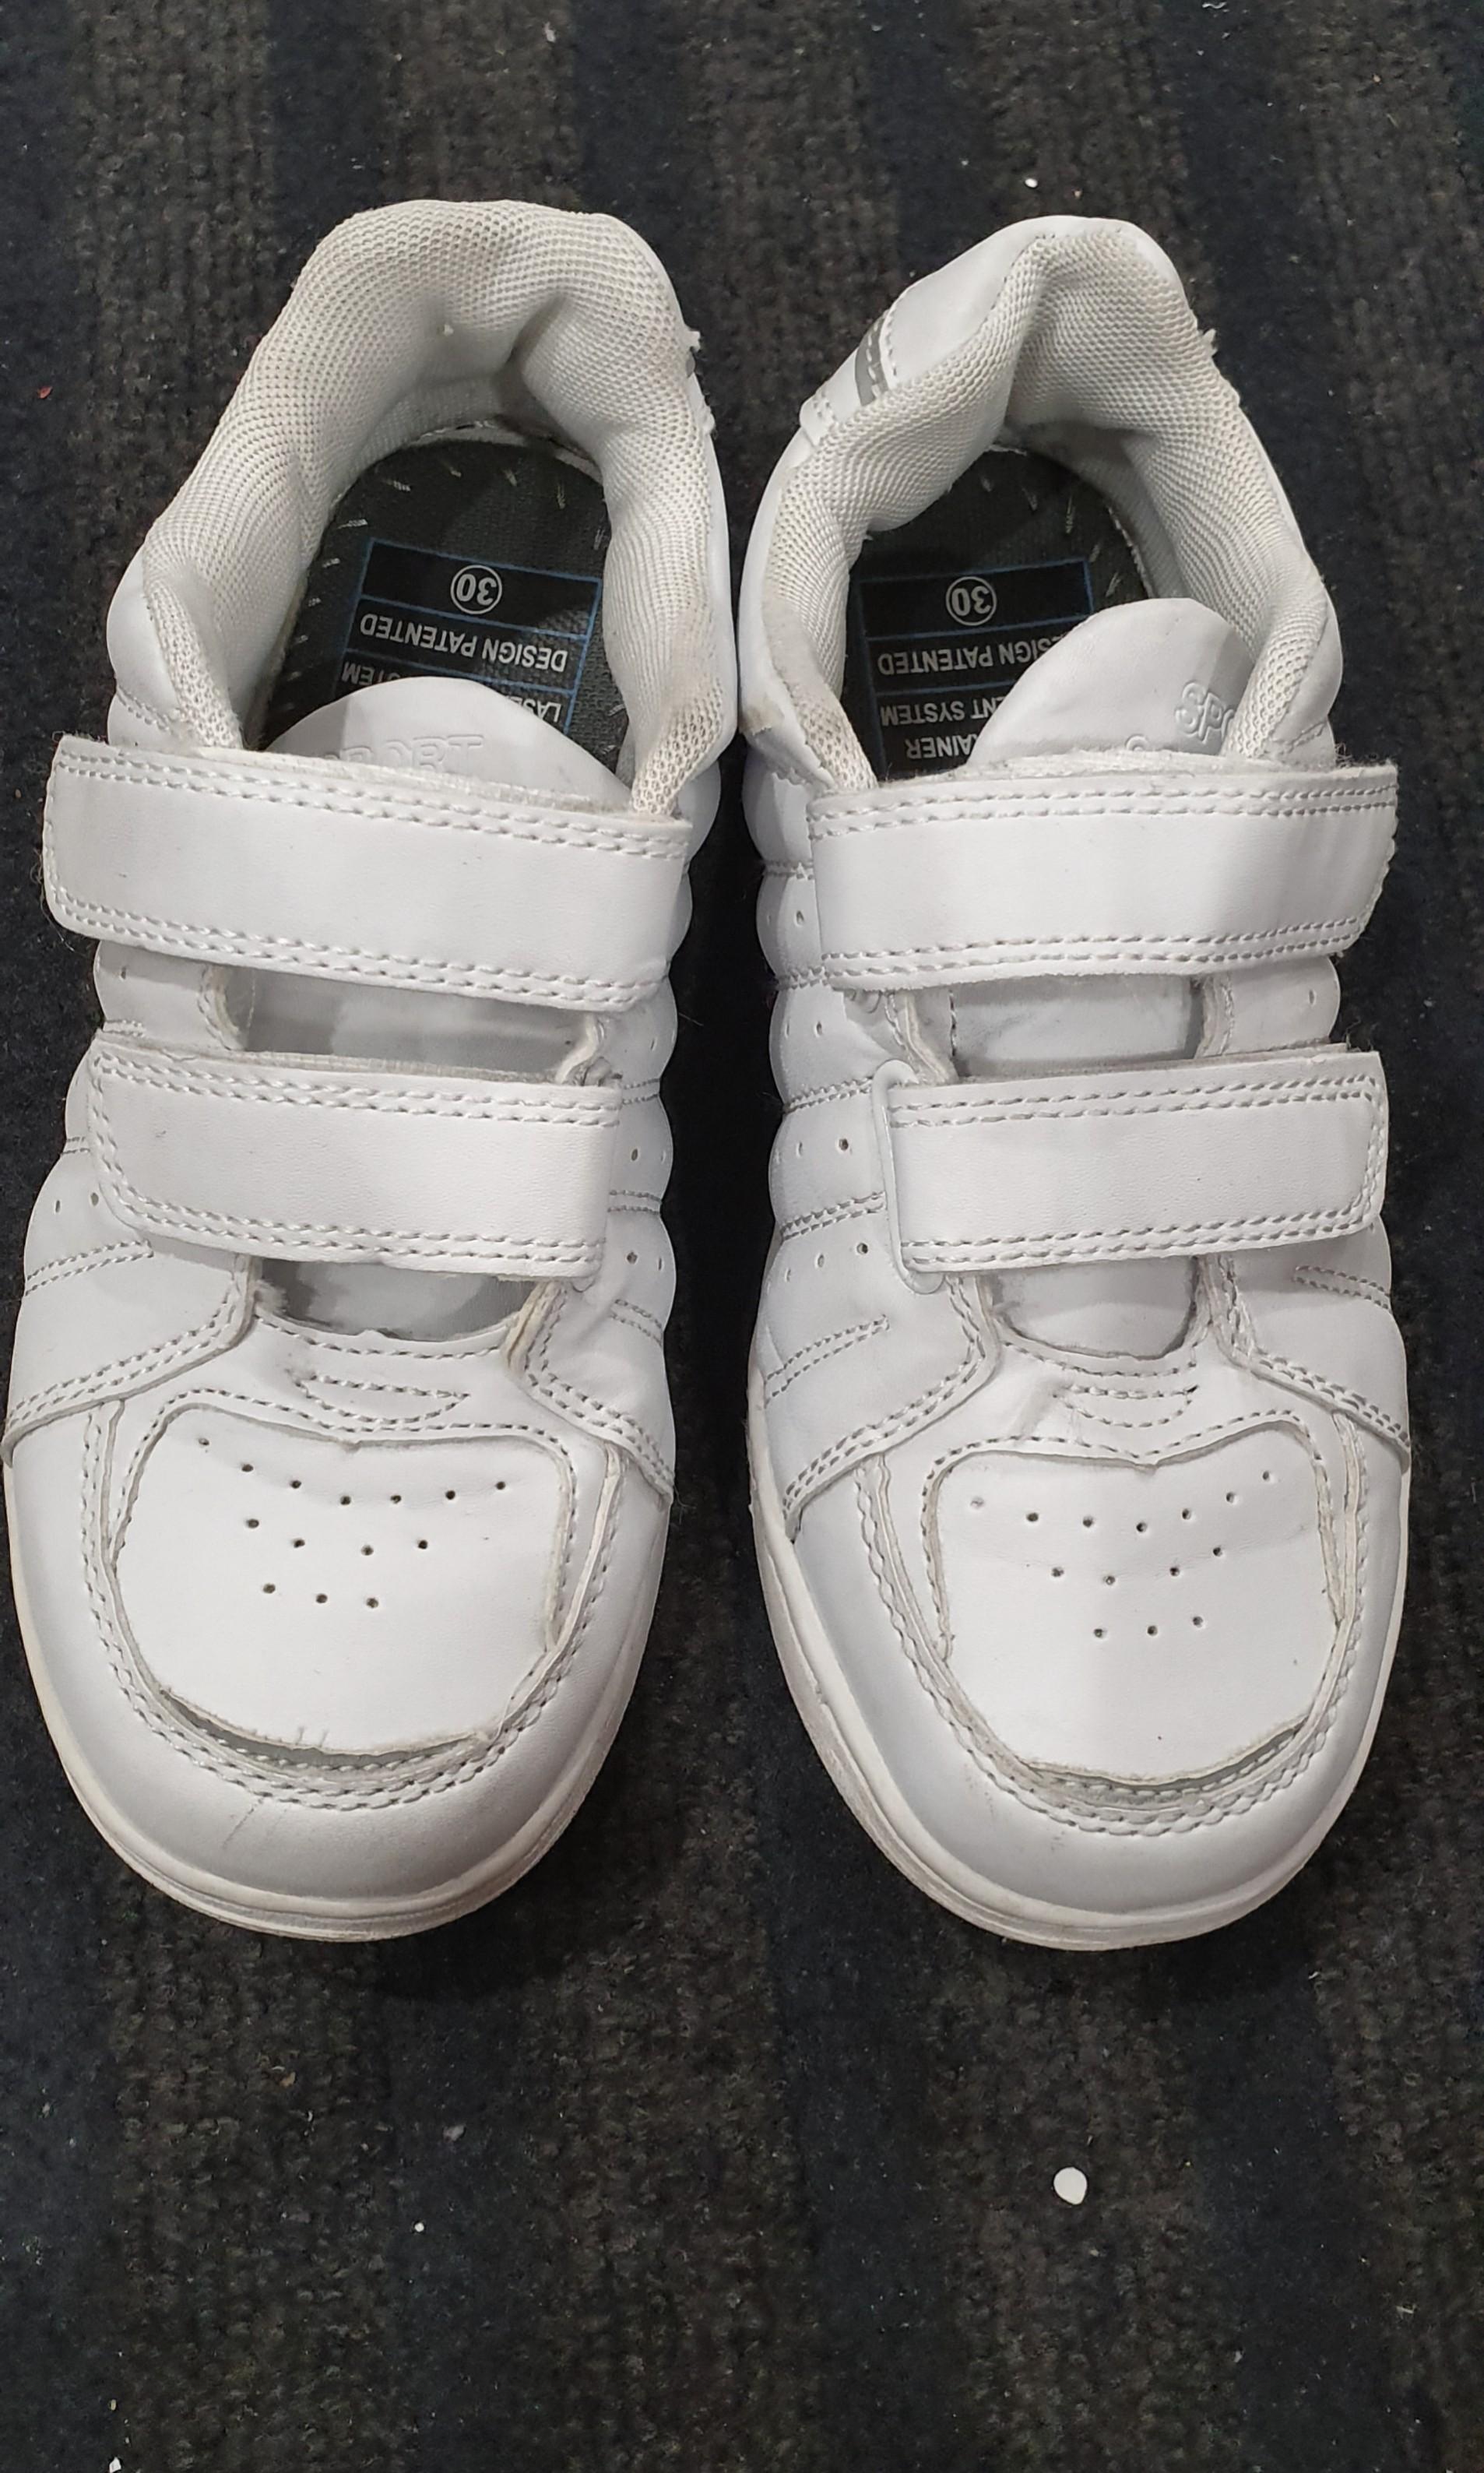 Unisex White Shoes for kids. Wide feet 